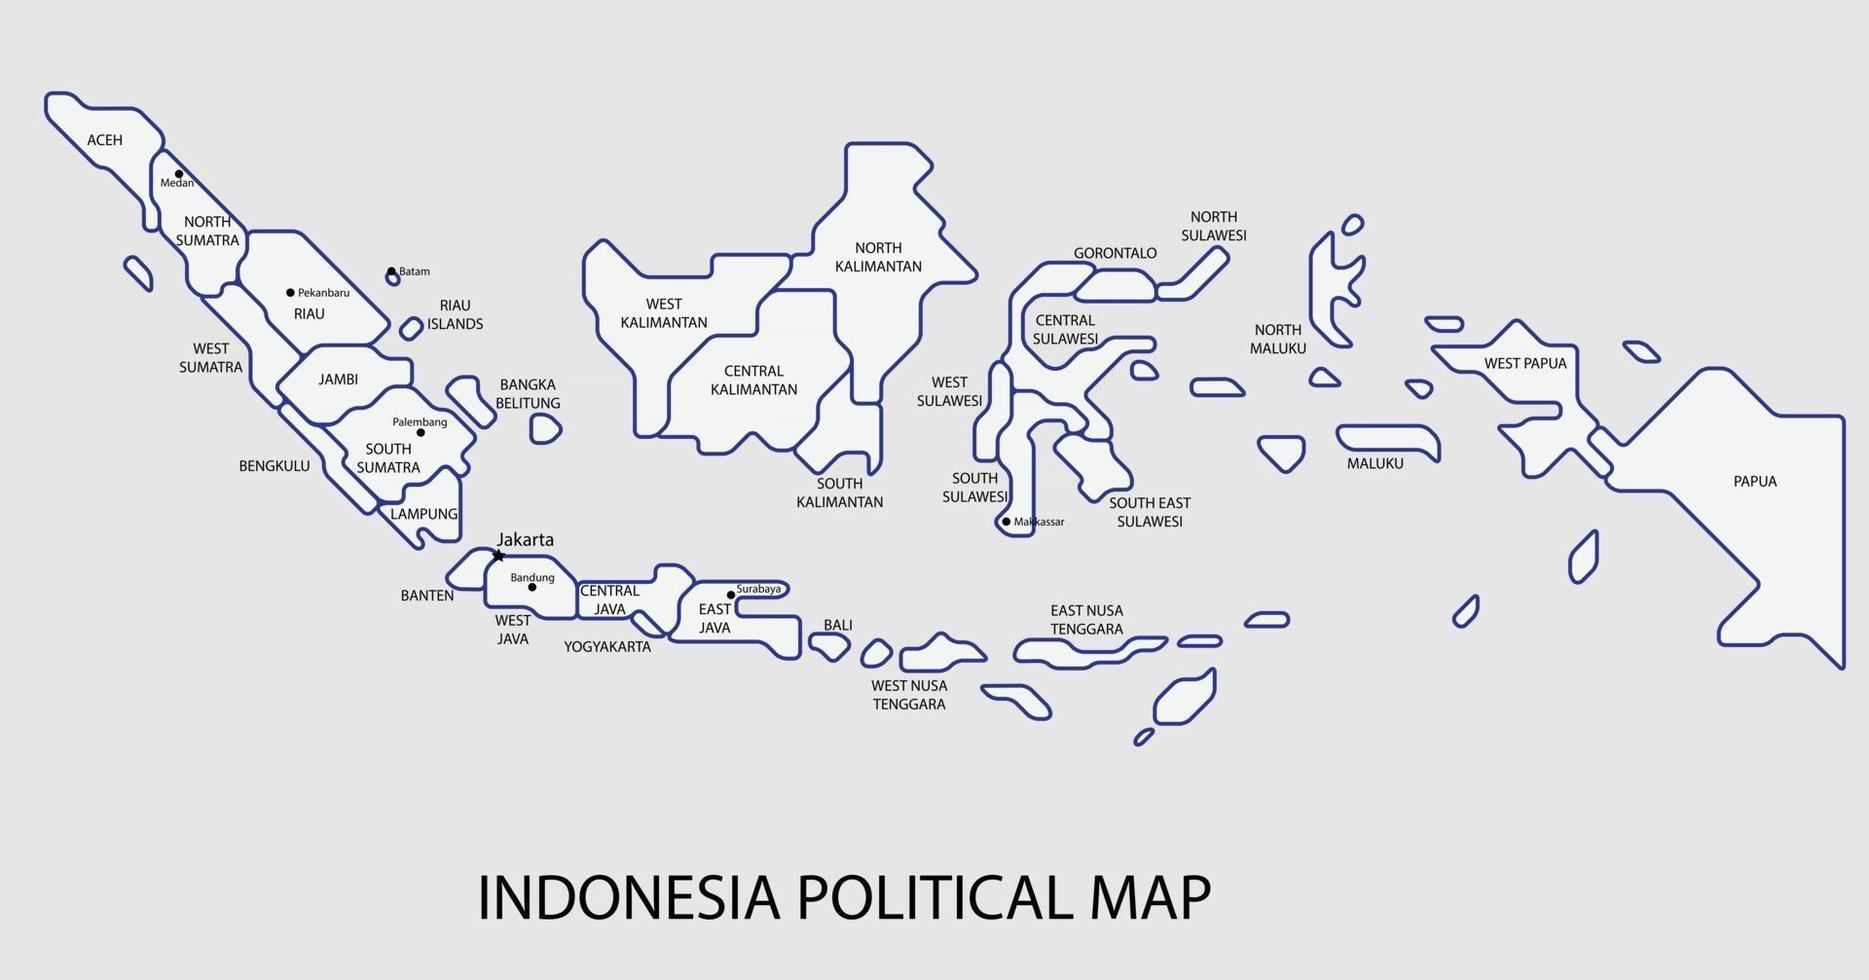 Indonesia political map divide by state colorful outline simplicity style. vector